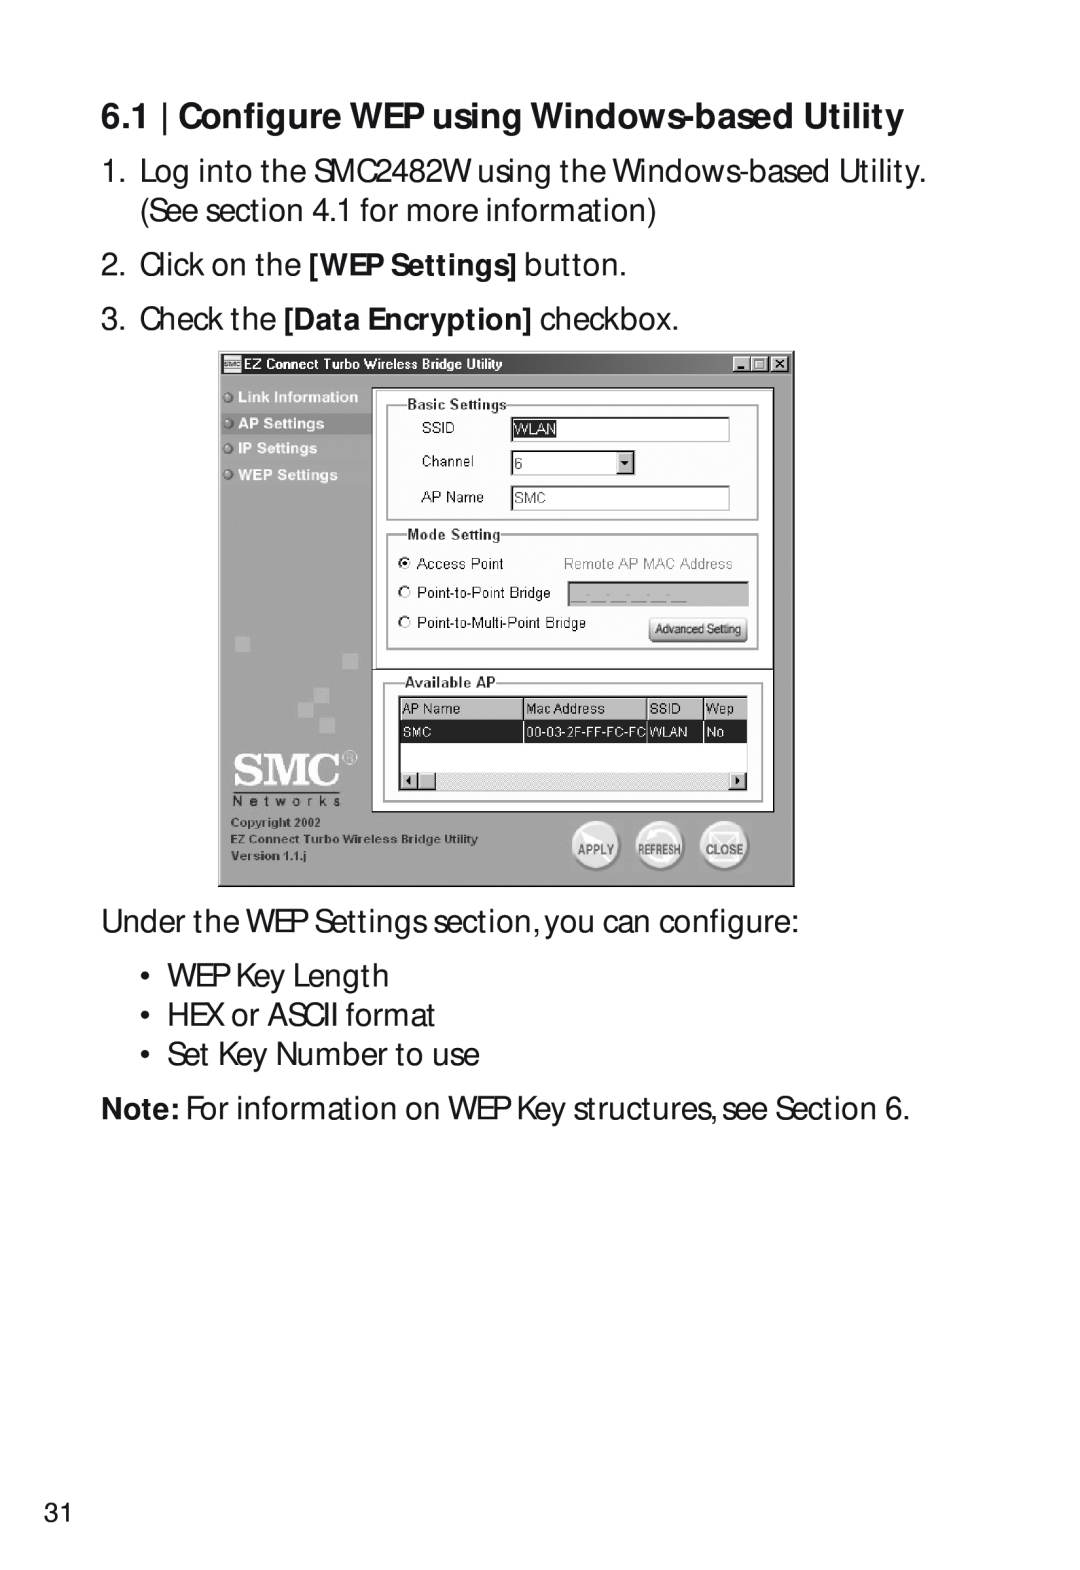 SMC Networks SMC2482W manual Configure WEP using Windows-based Utility, Click on the WEP Settings button 